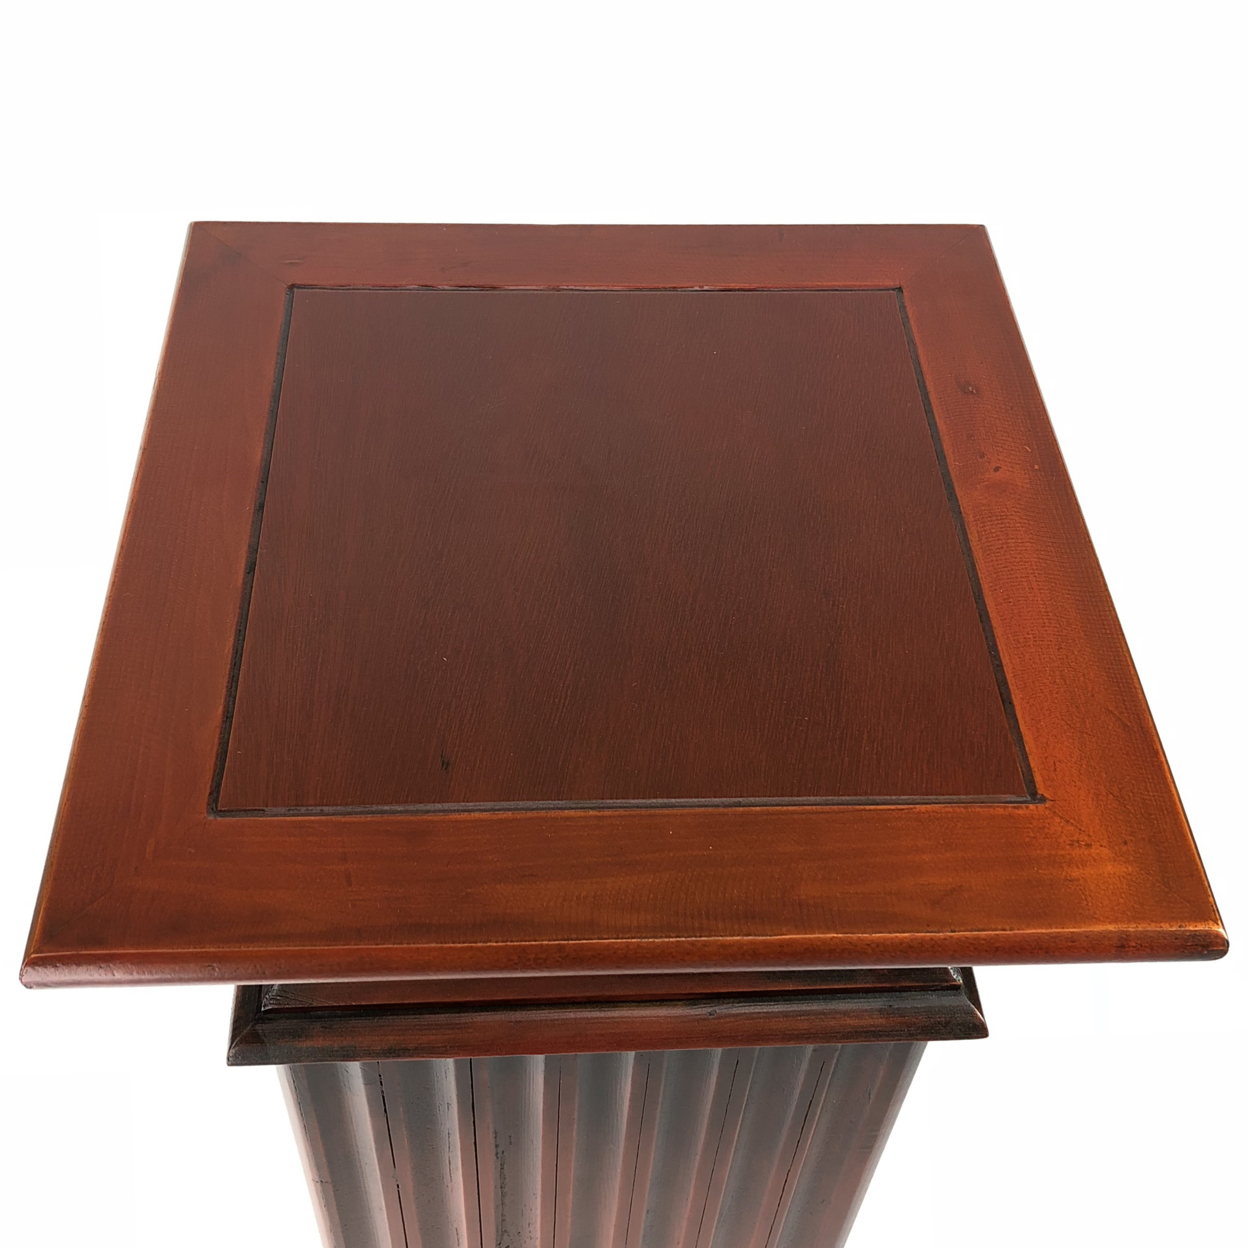 Transitional Style Square Top Pedestal Stand, Brown- Saltoro Sherpi